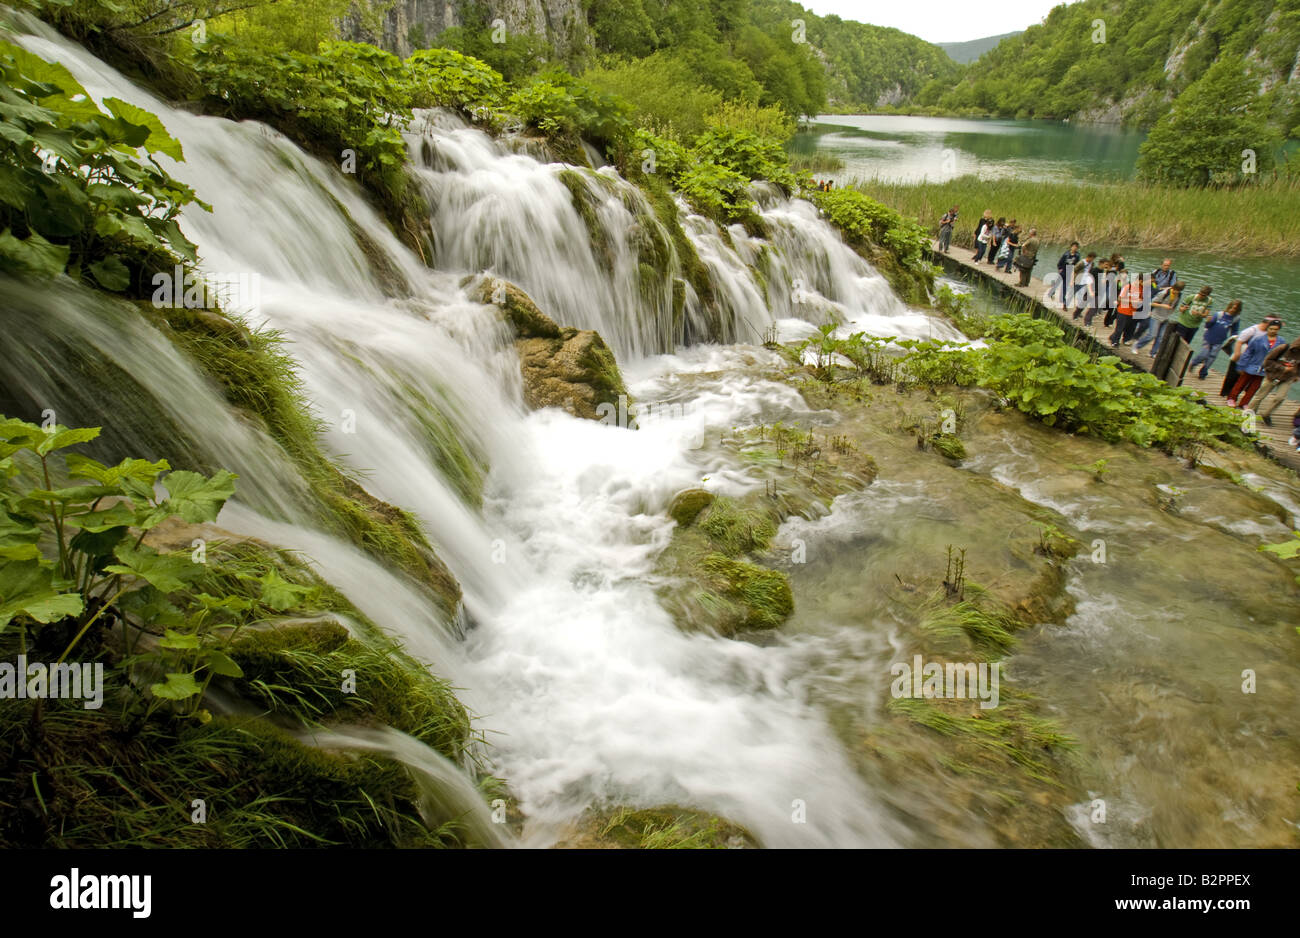 Plitvice Lakes National Park waterfalls between lakes with young visitors on boardwalk Stock Photo